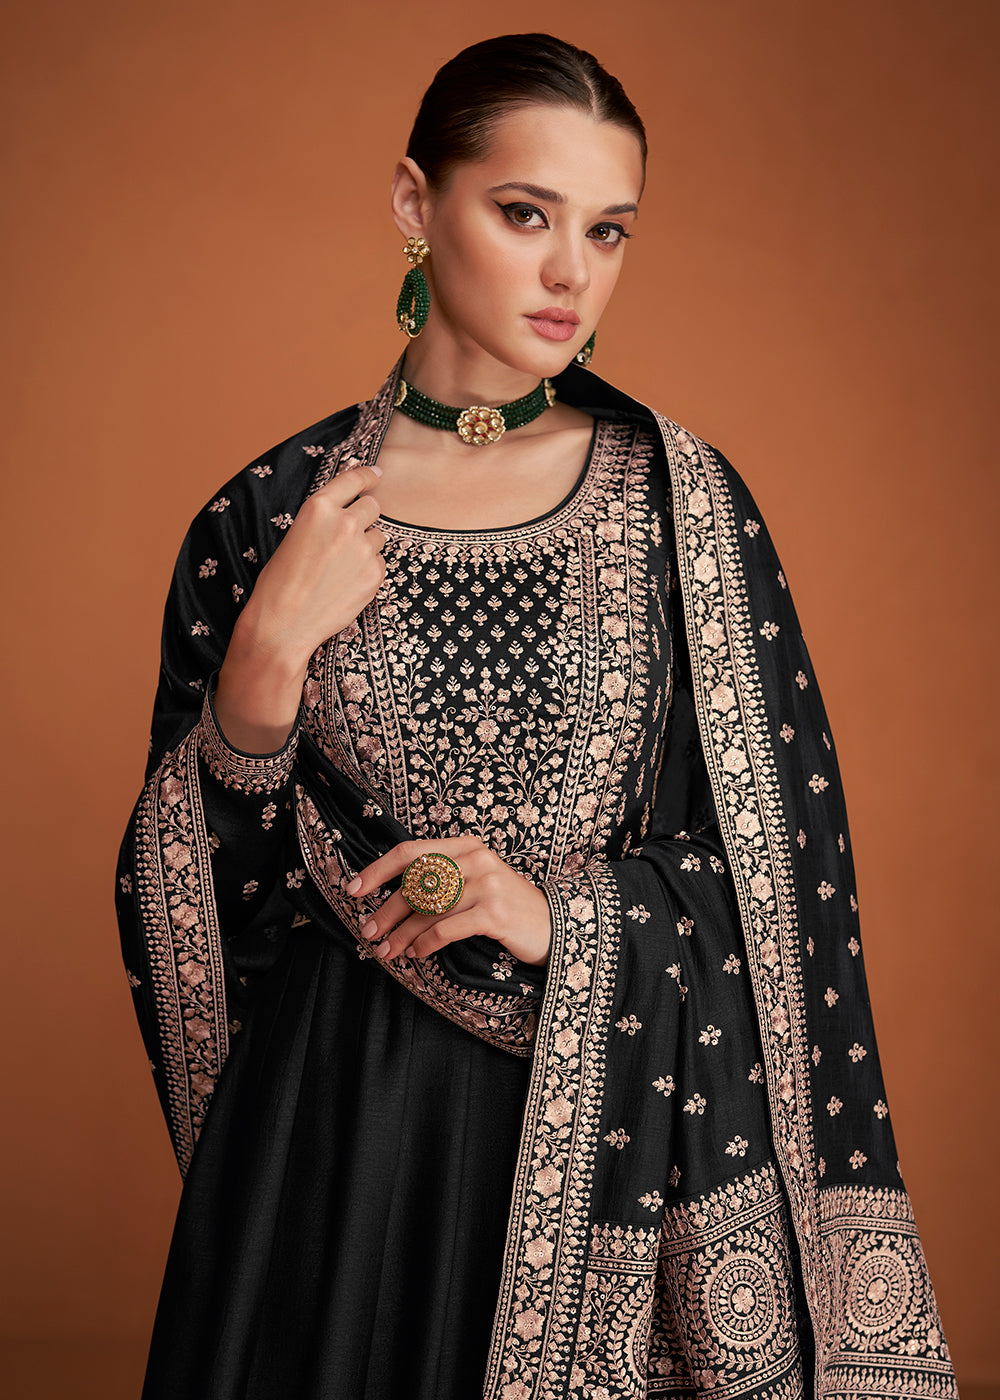 Buy Now Astonishing Black Silk Embroidered Party Wear Anarkali Online in USA, UK, Australia, New Zealand, Canada, Italy & Worldwide at Empress Clothing.